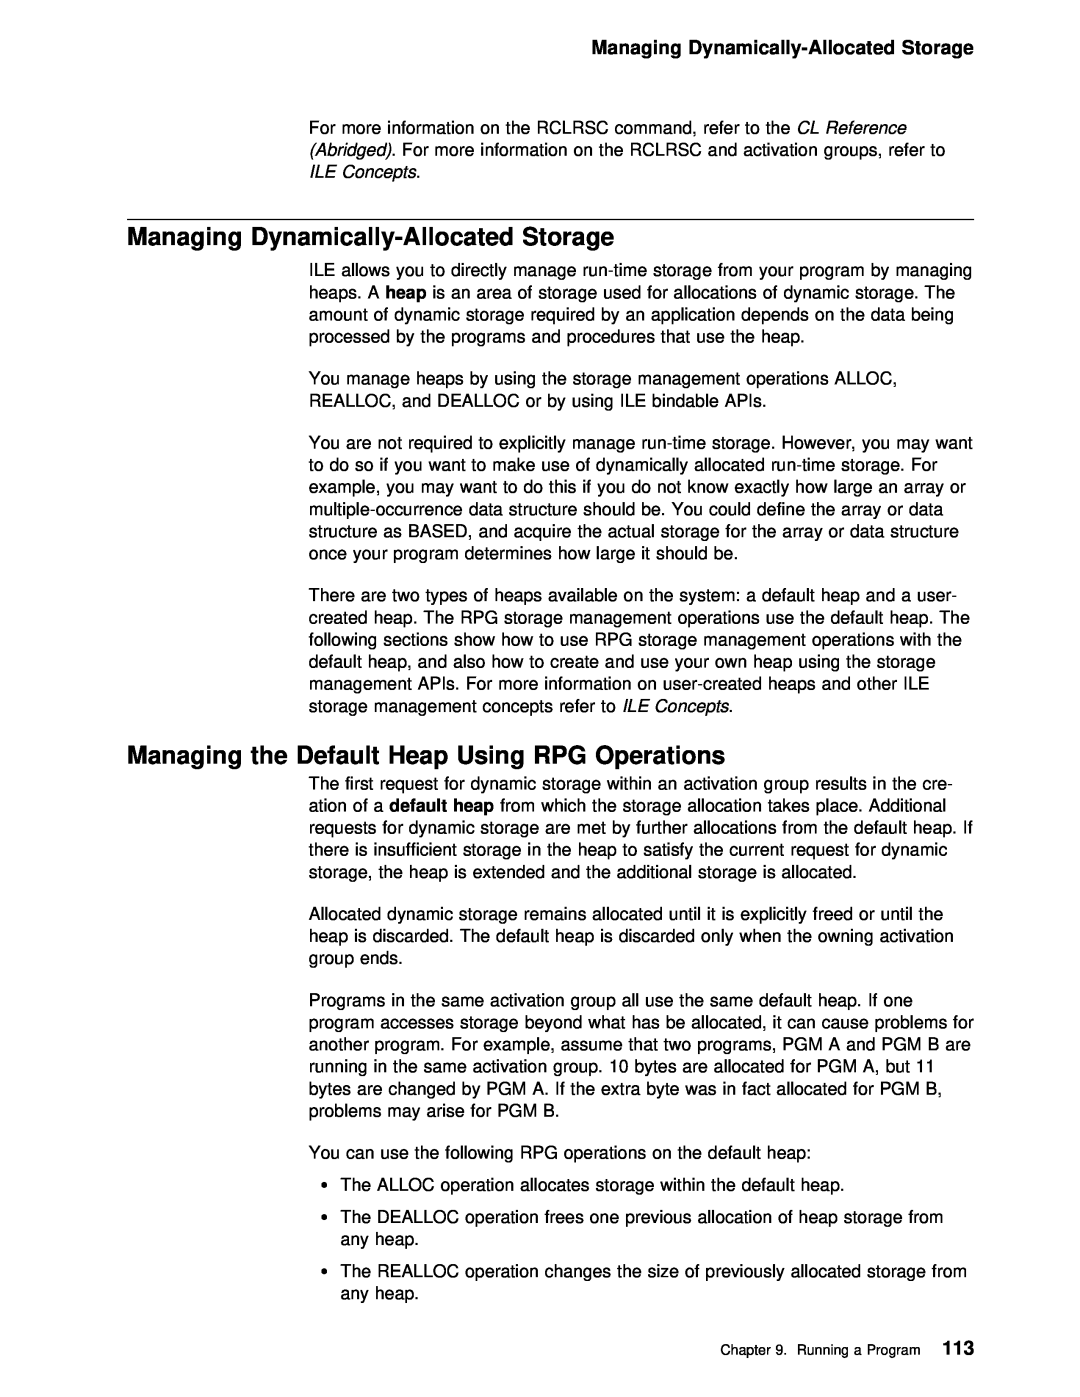 IBM AS/400 manual Managing the Default Heap Using RPG Operations, Managing Dynamically-Allocated, Storage 